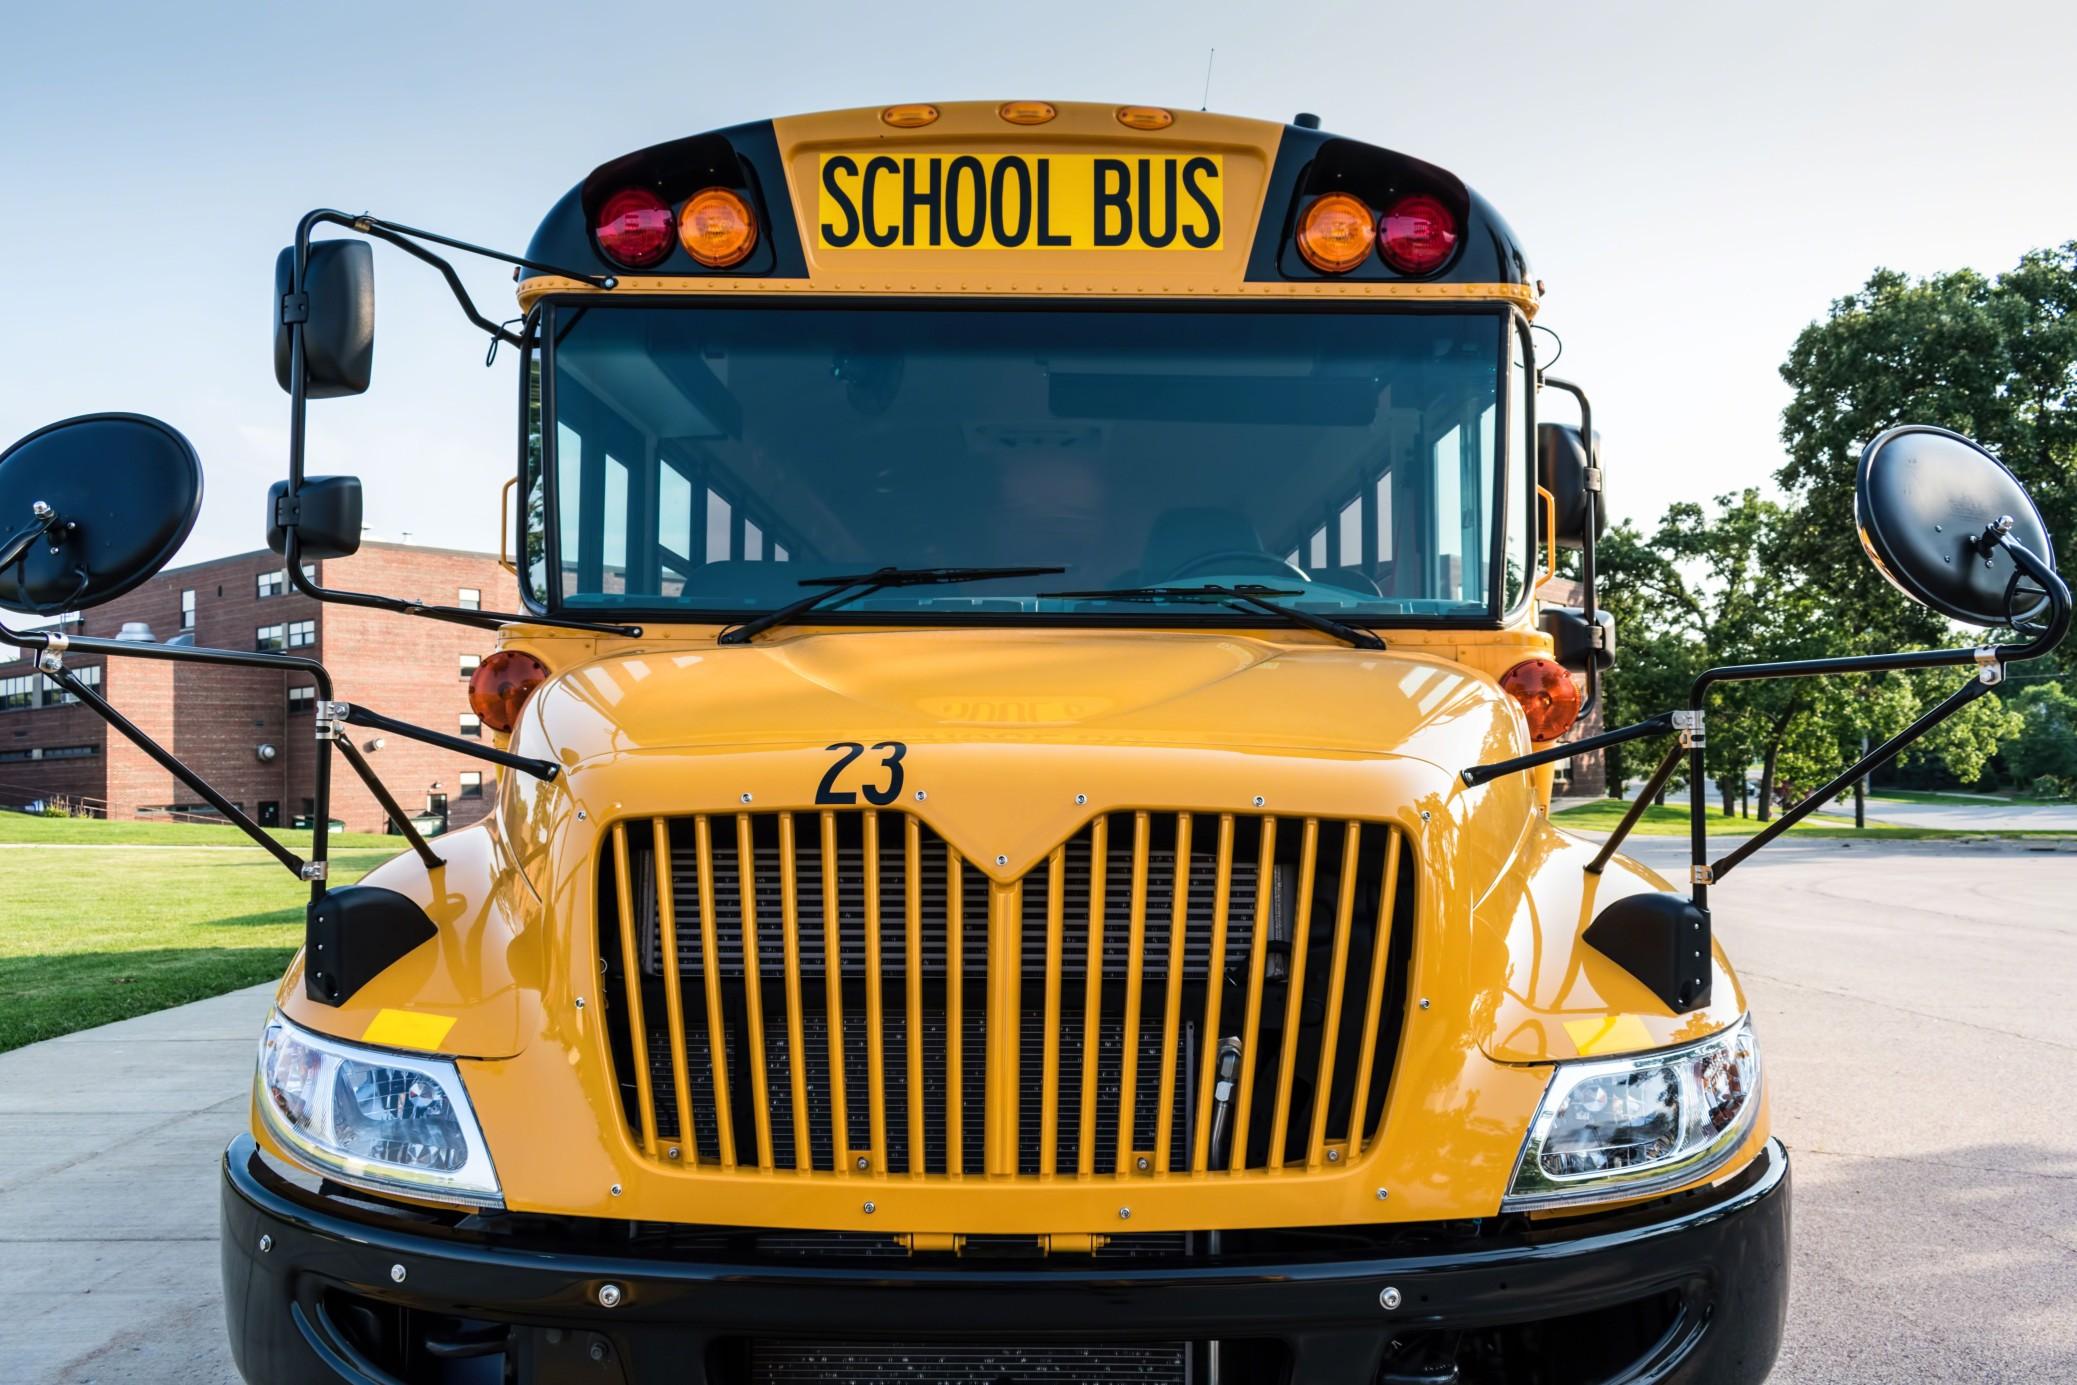 There is currently a shortage of school bus drivers across the country.